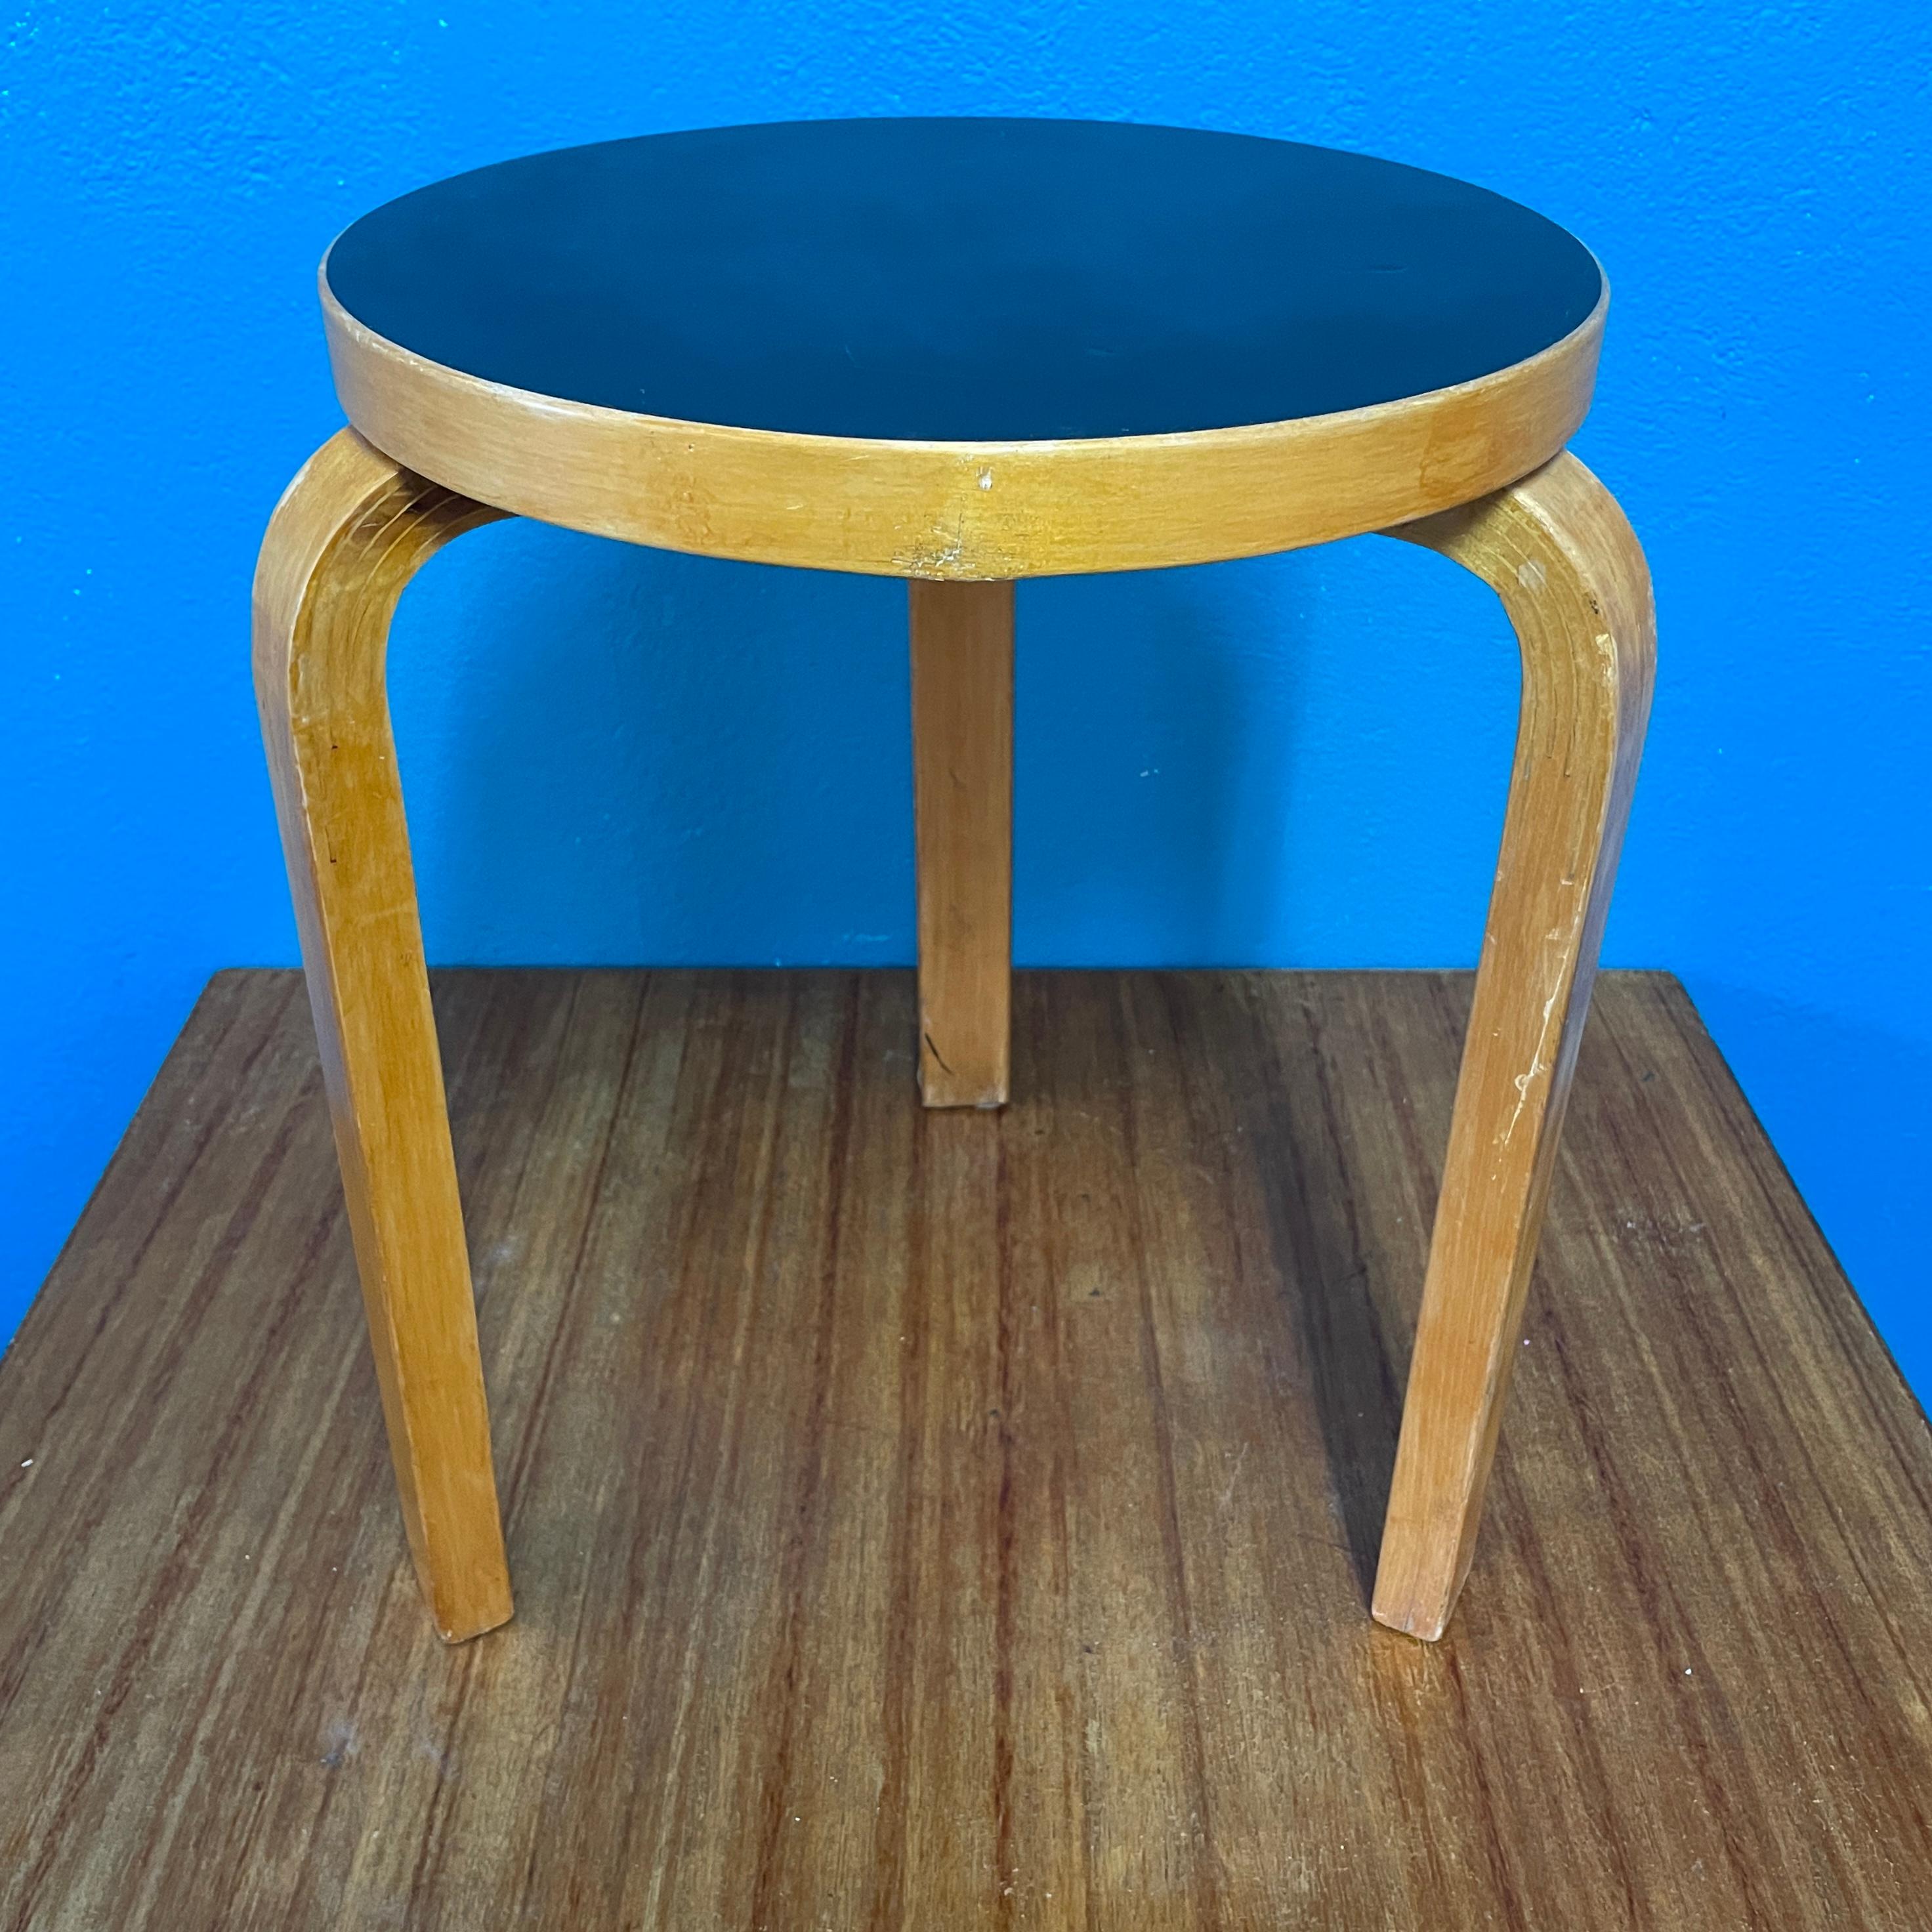 Iconic Aalto three-legged stool. Stool 60 was officially unveiled to an enthusiastic public in London at a Finnish furniture review in November 1933.

This Stool is Original vintage version of stool from early 1950´s. Lot of wear of use, but the